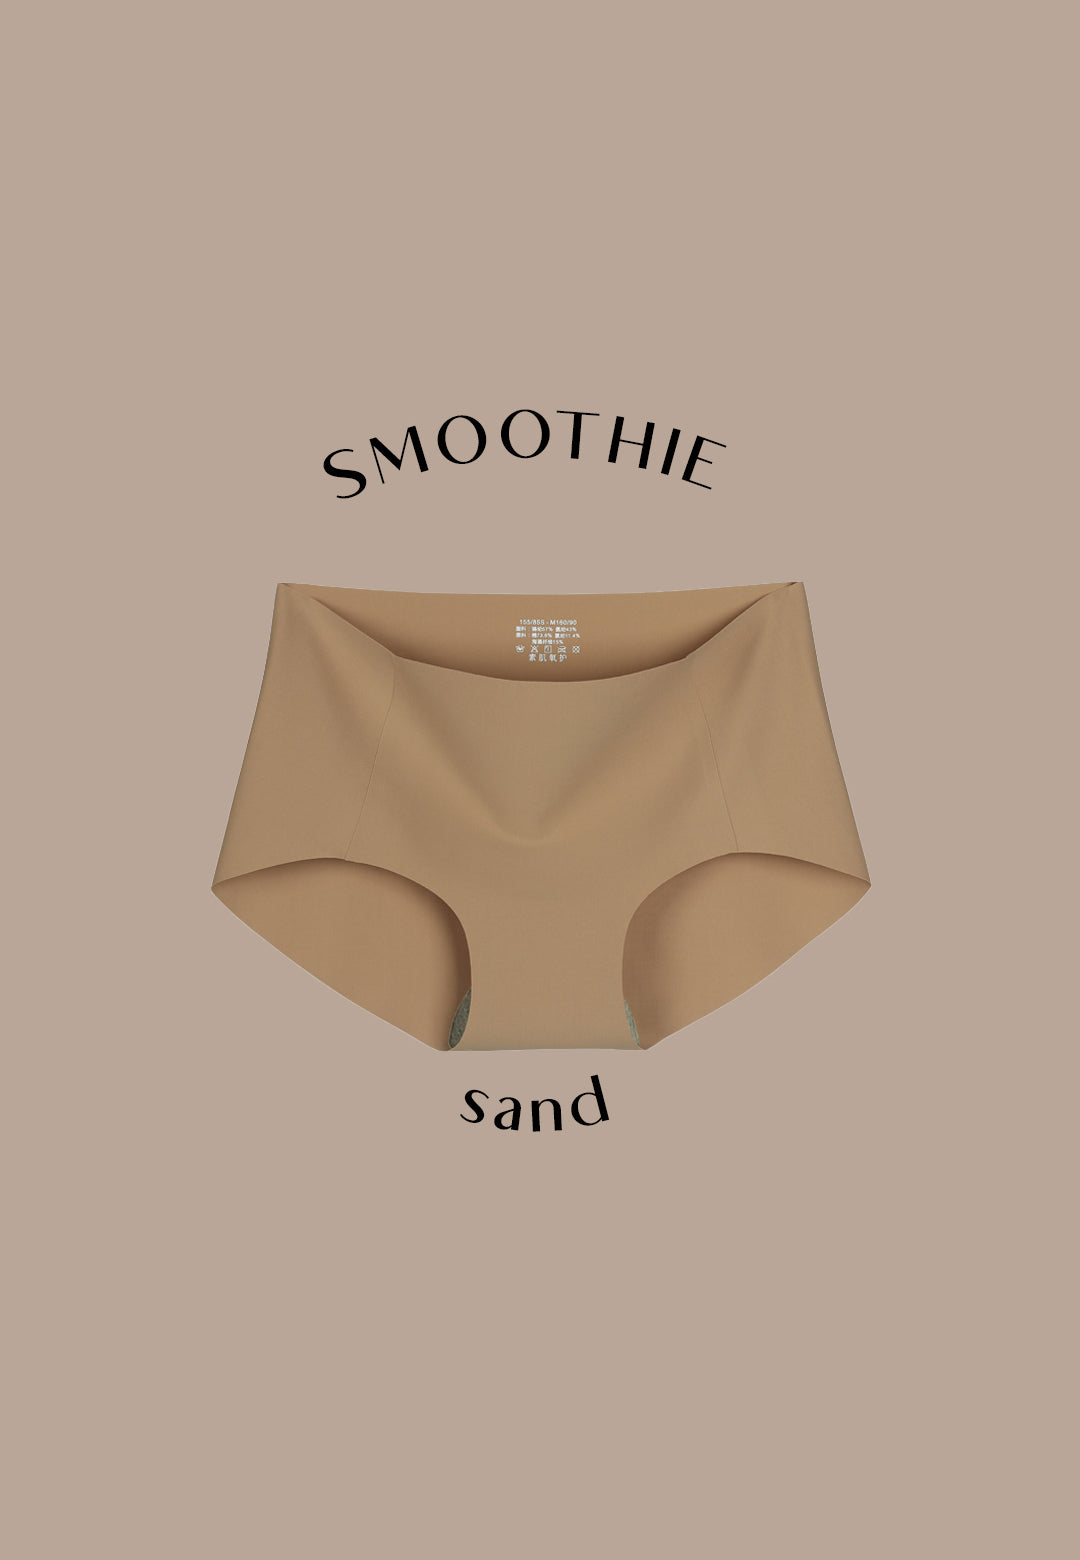 Lightweight, super-smooooth undies you can wear under ANY outfit. #smo